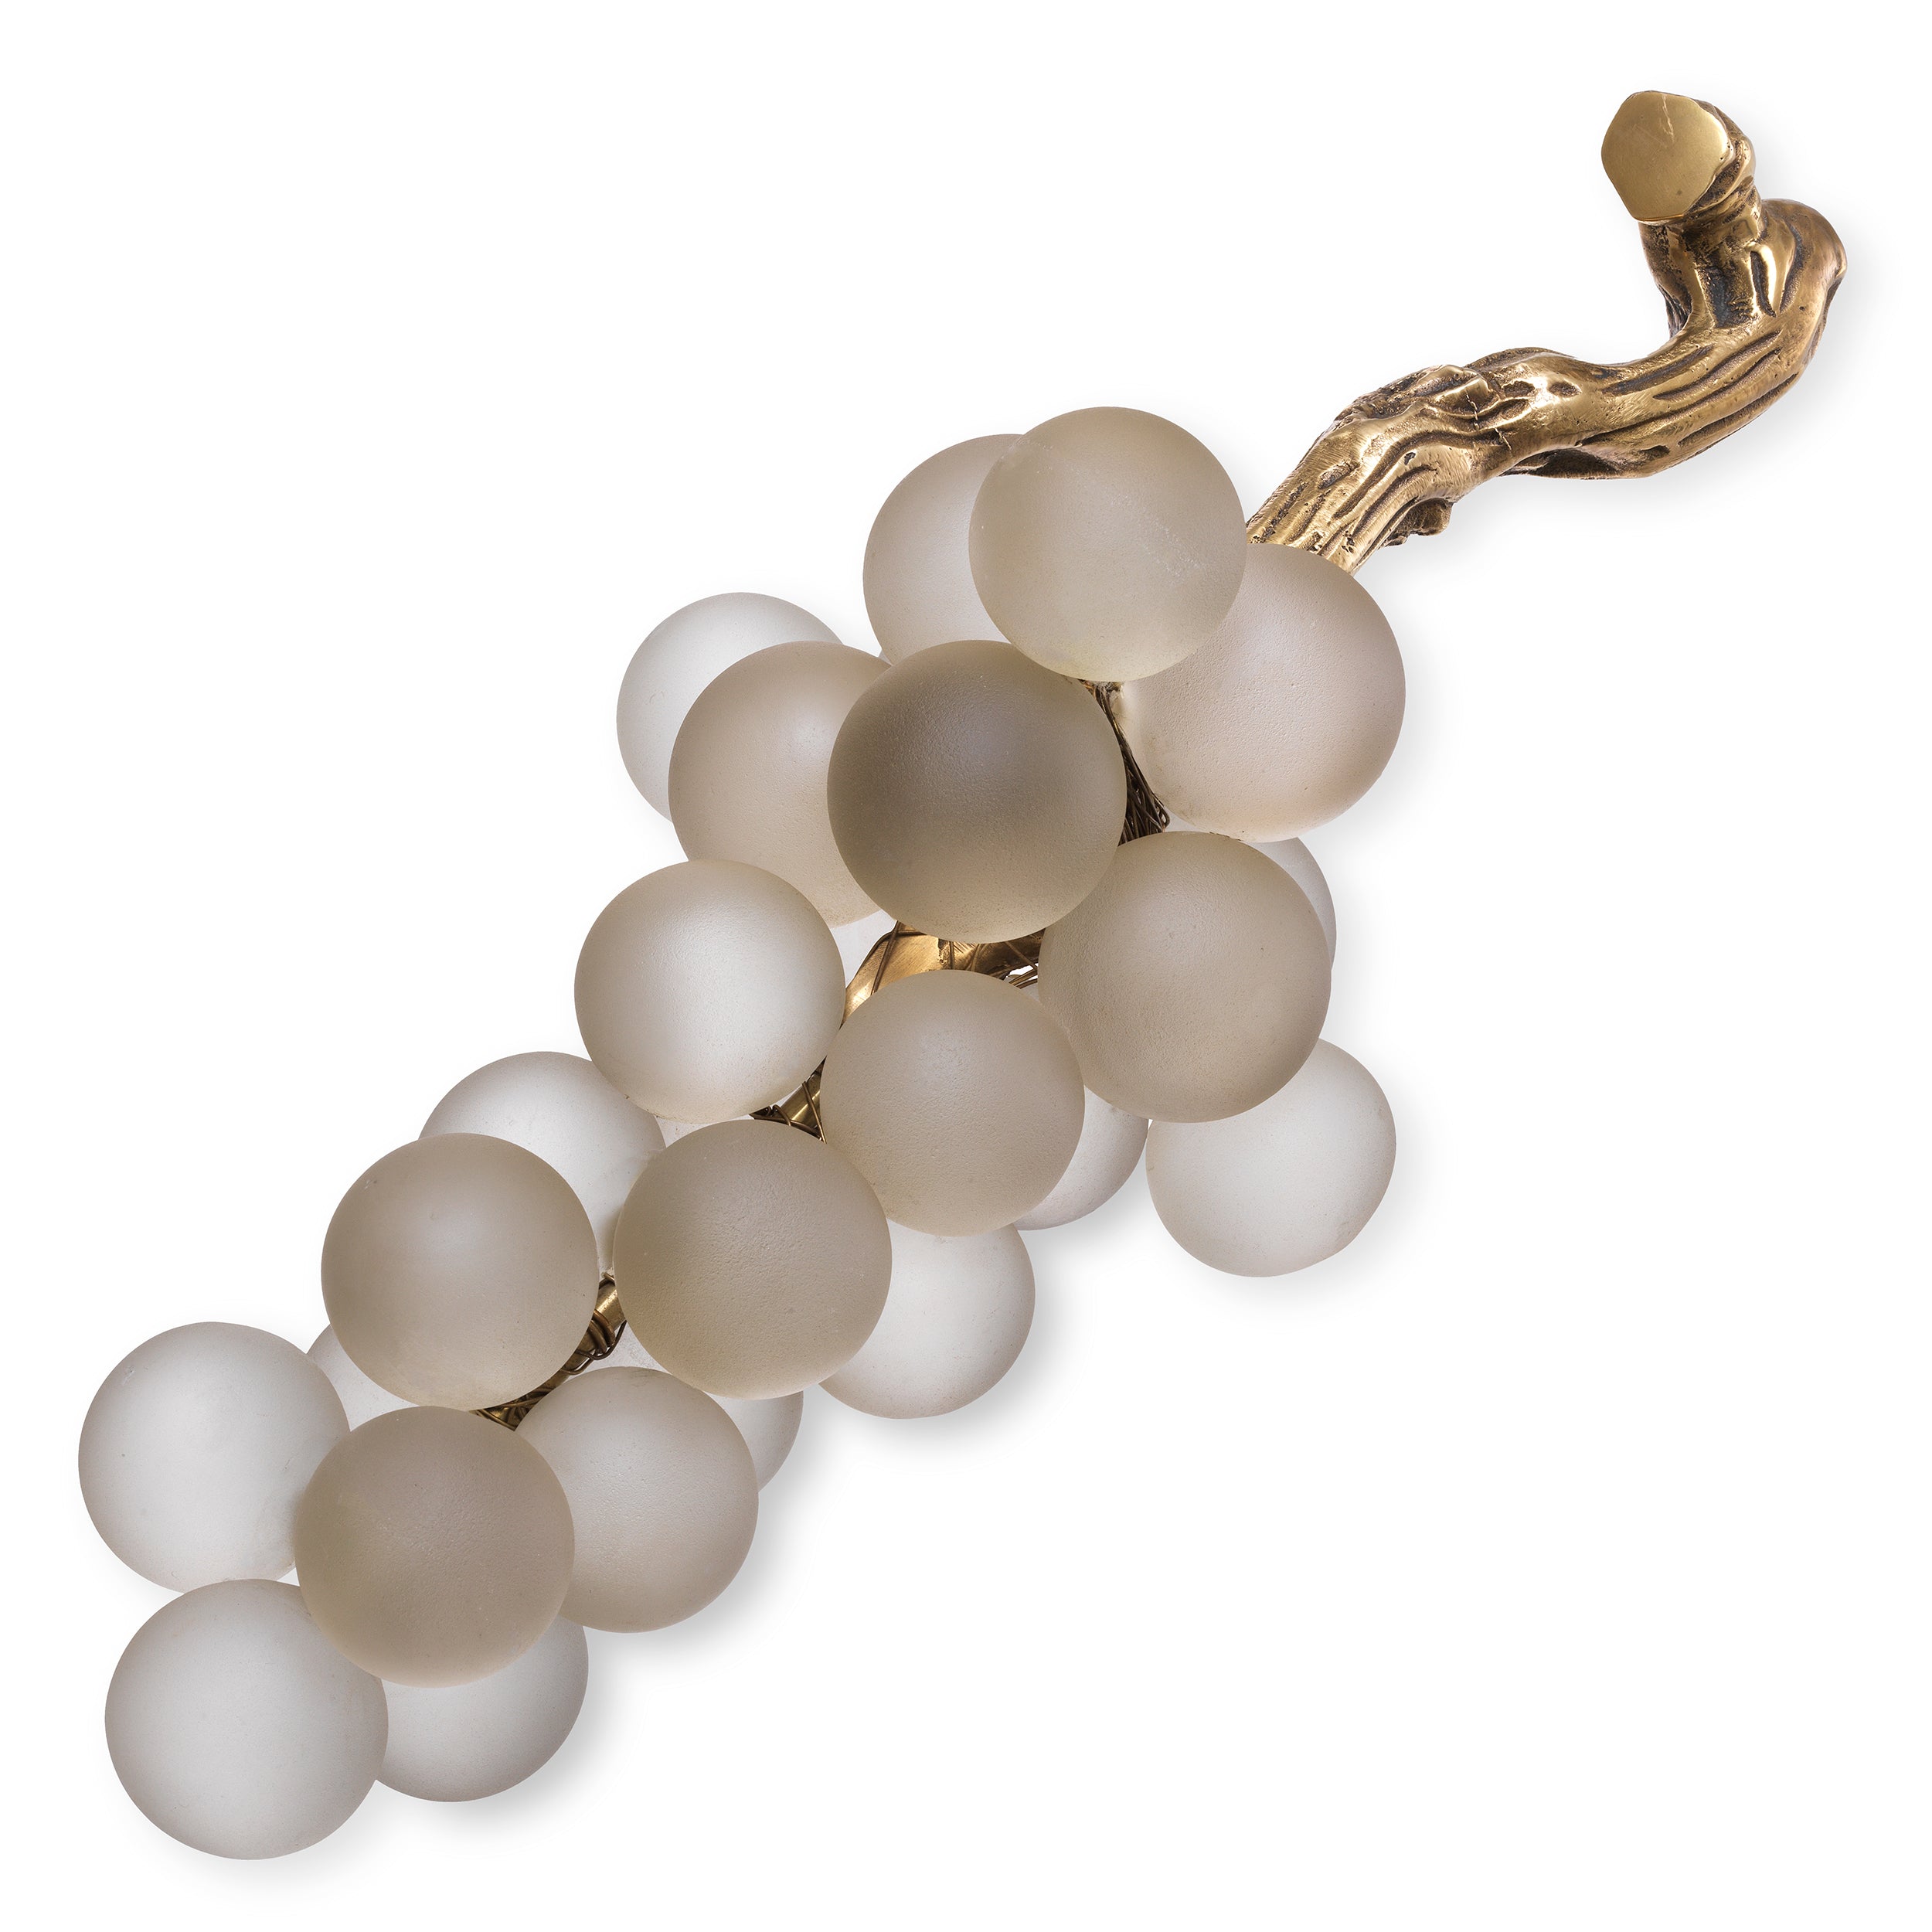 Object French Grapes - Wit